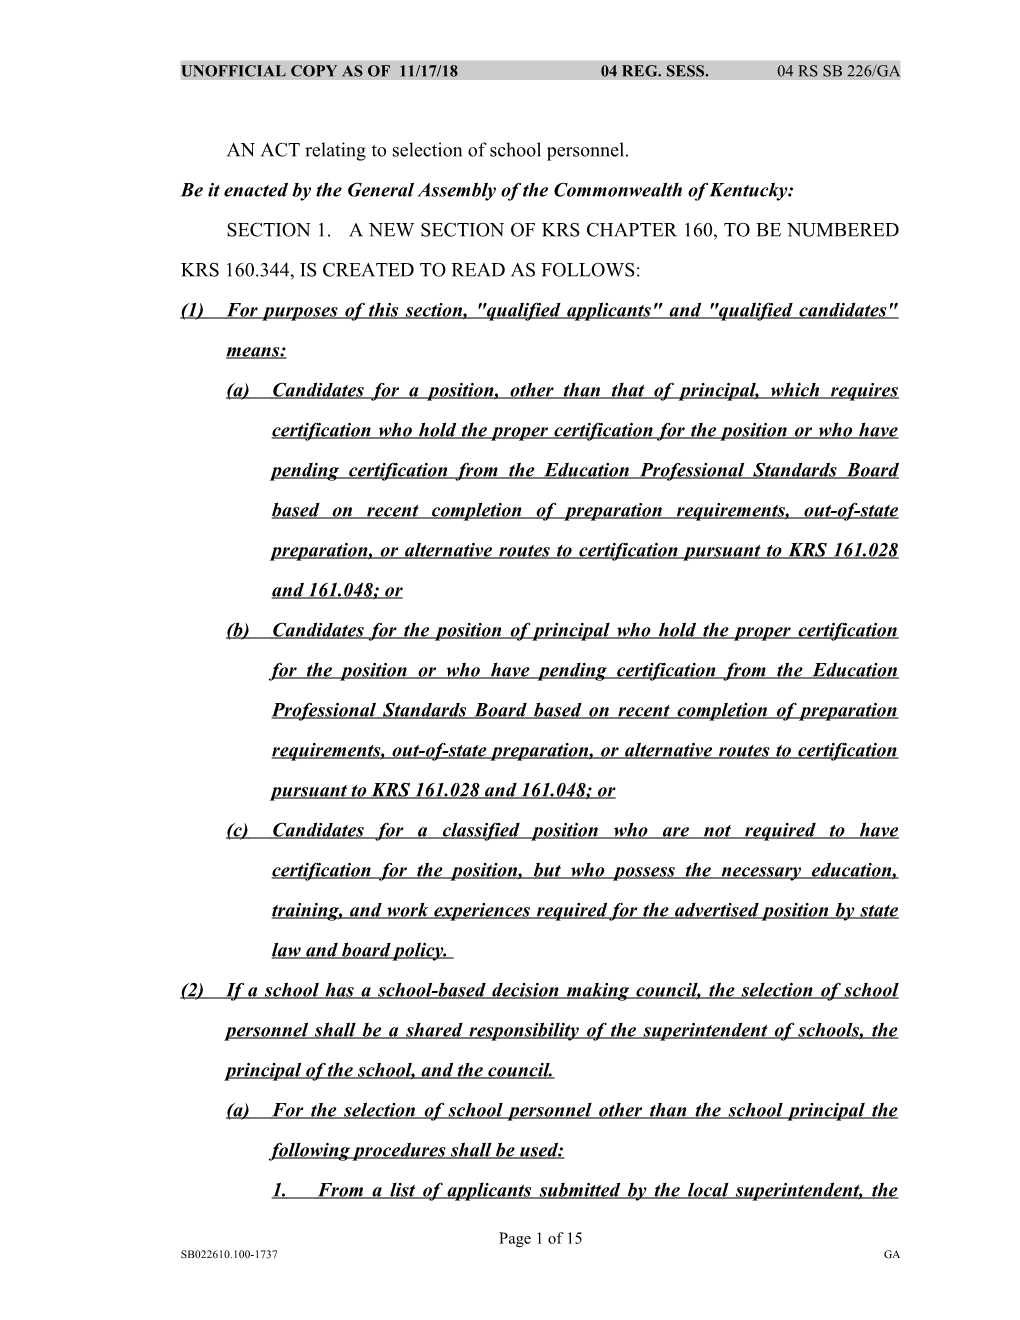 AN ACT Relating to Selection of School Personnel